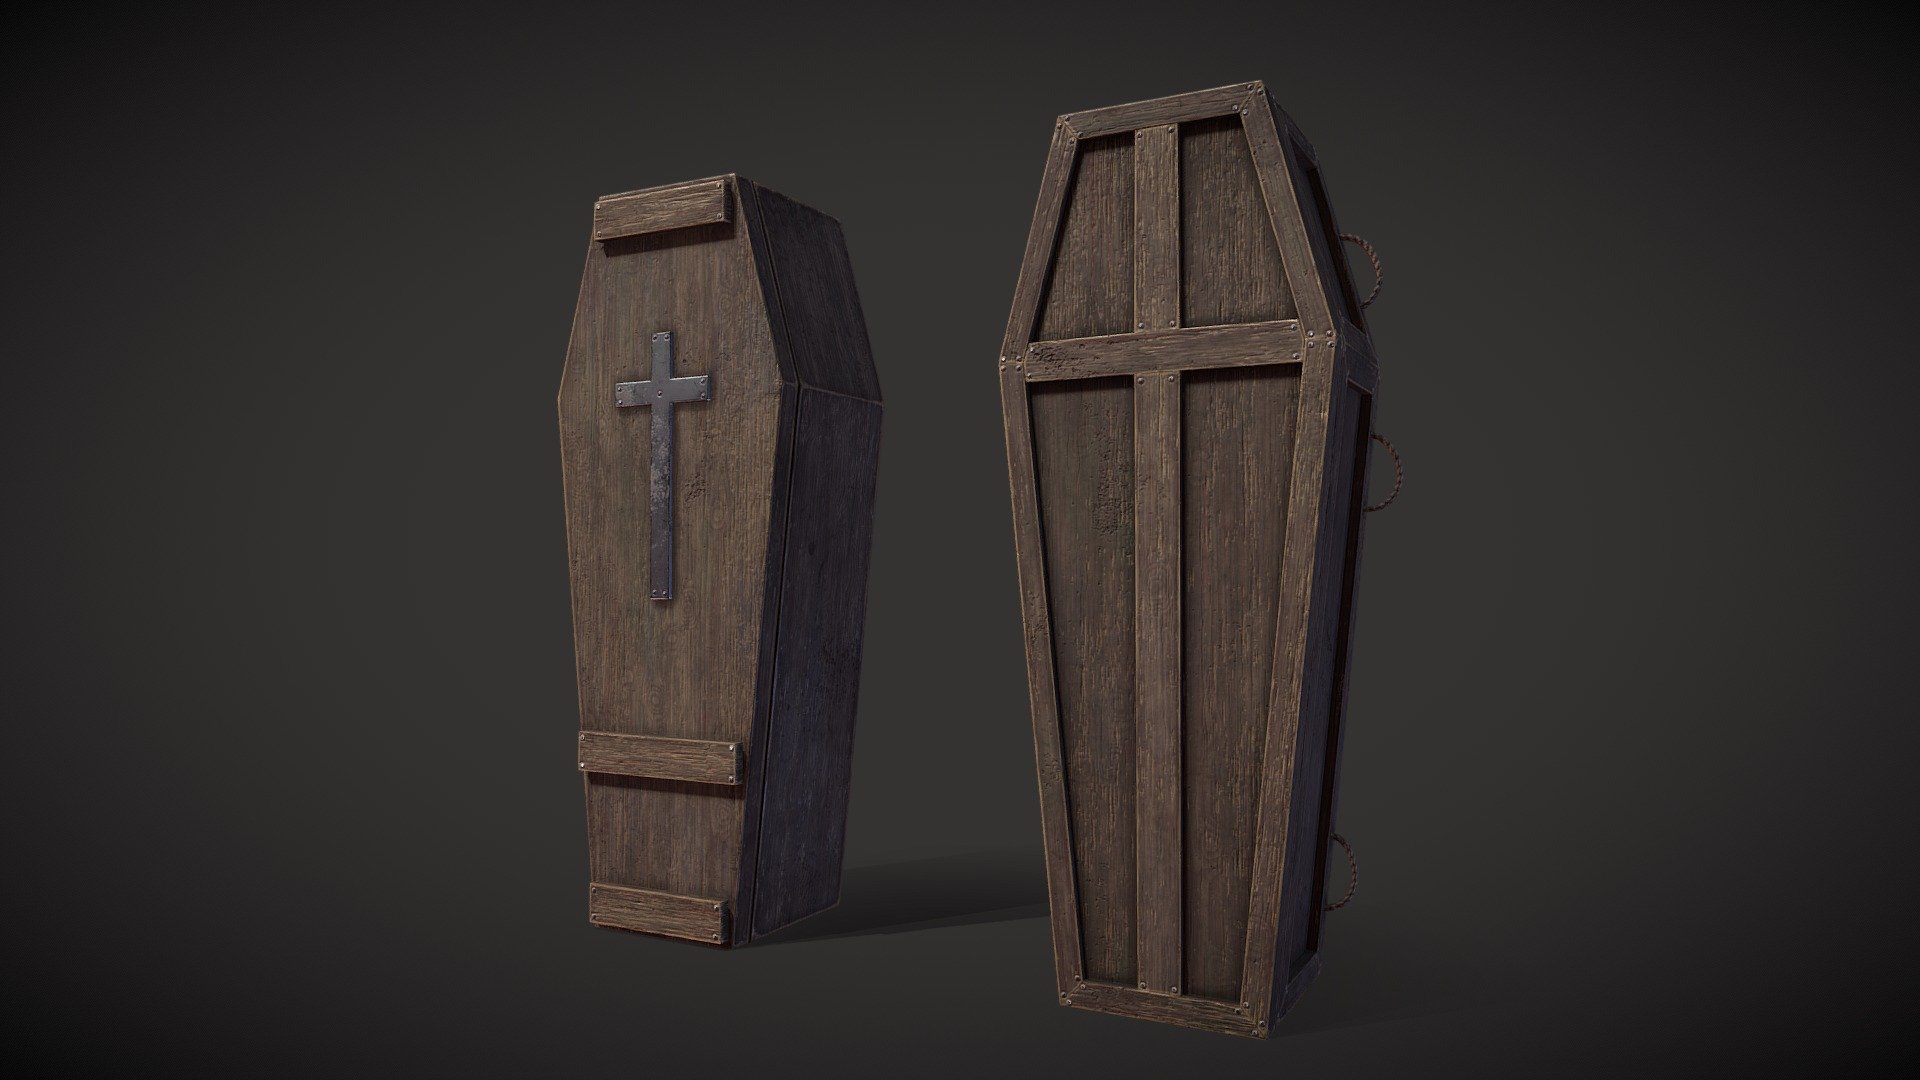 Assets for my 6th semester school project 3d model